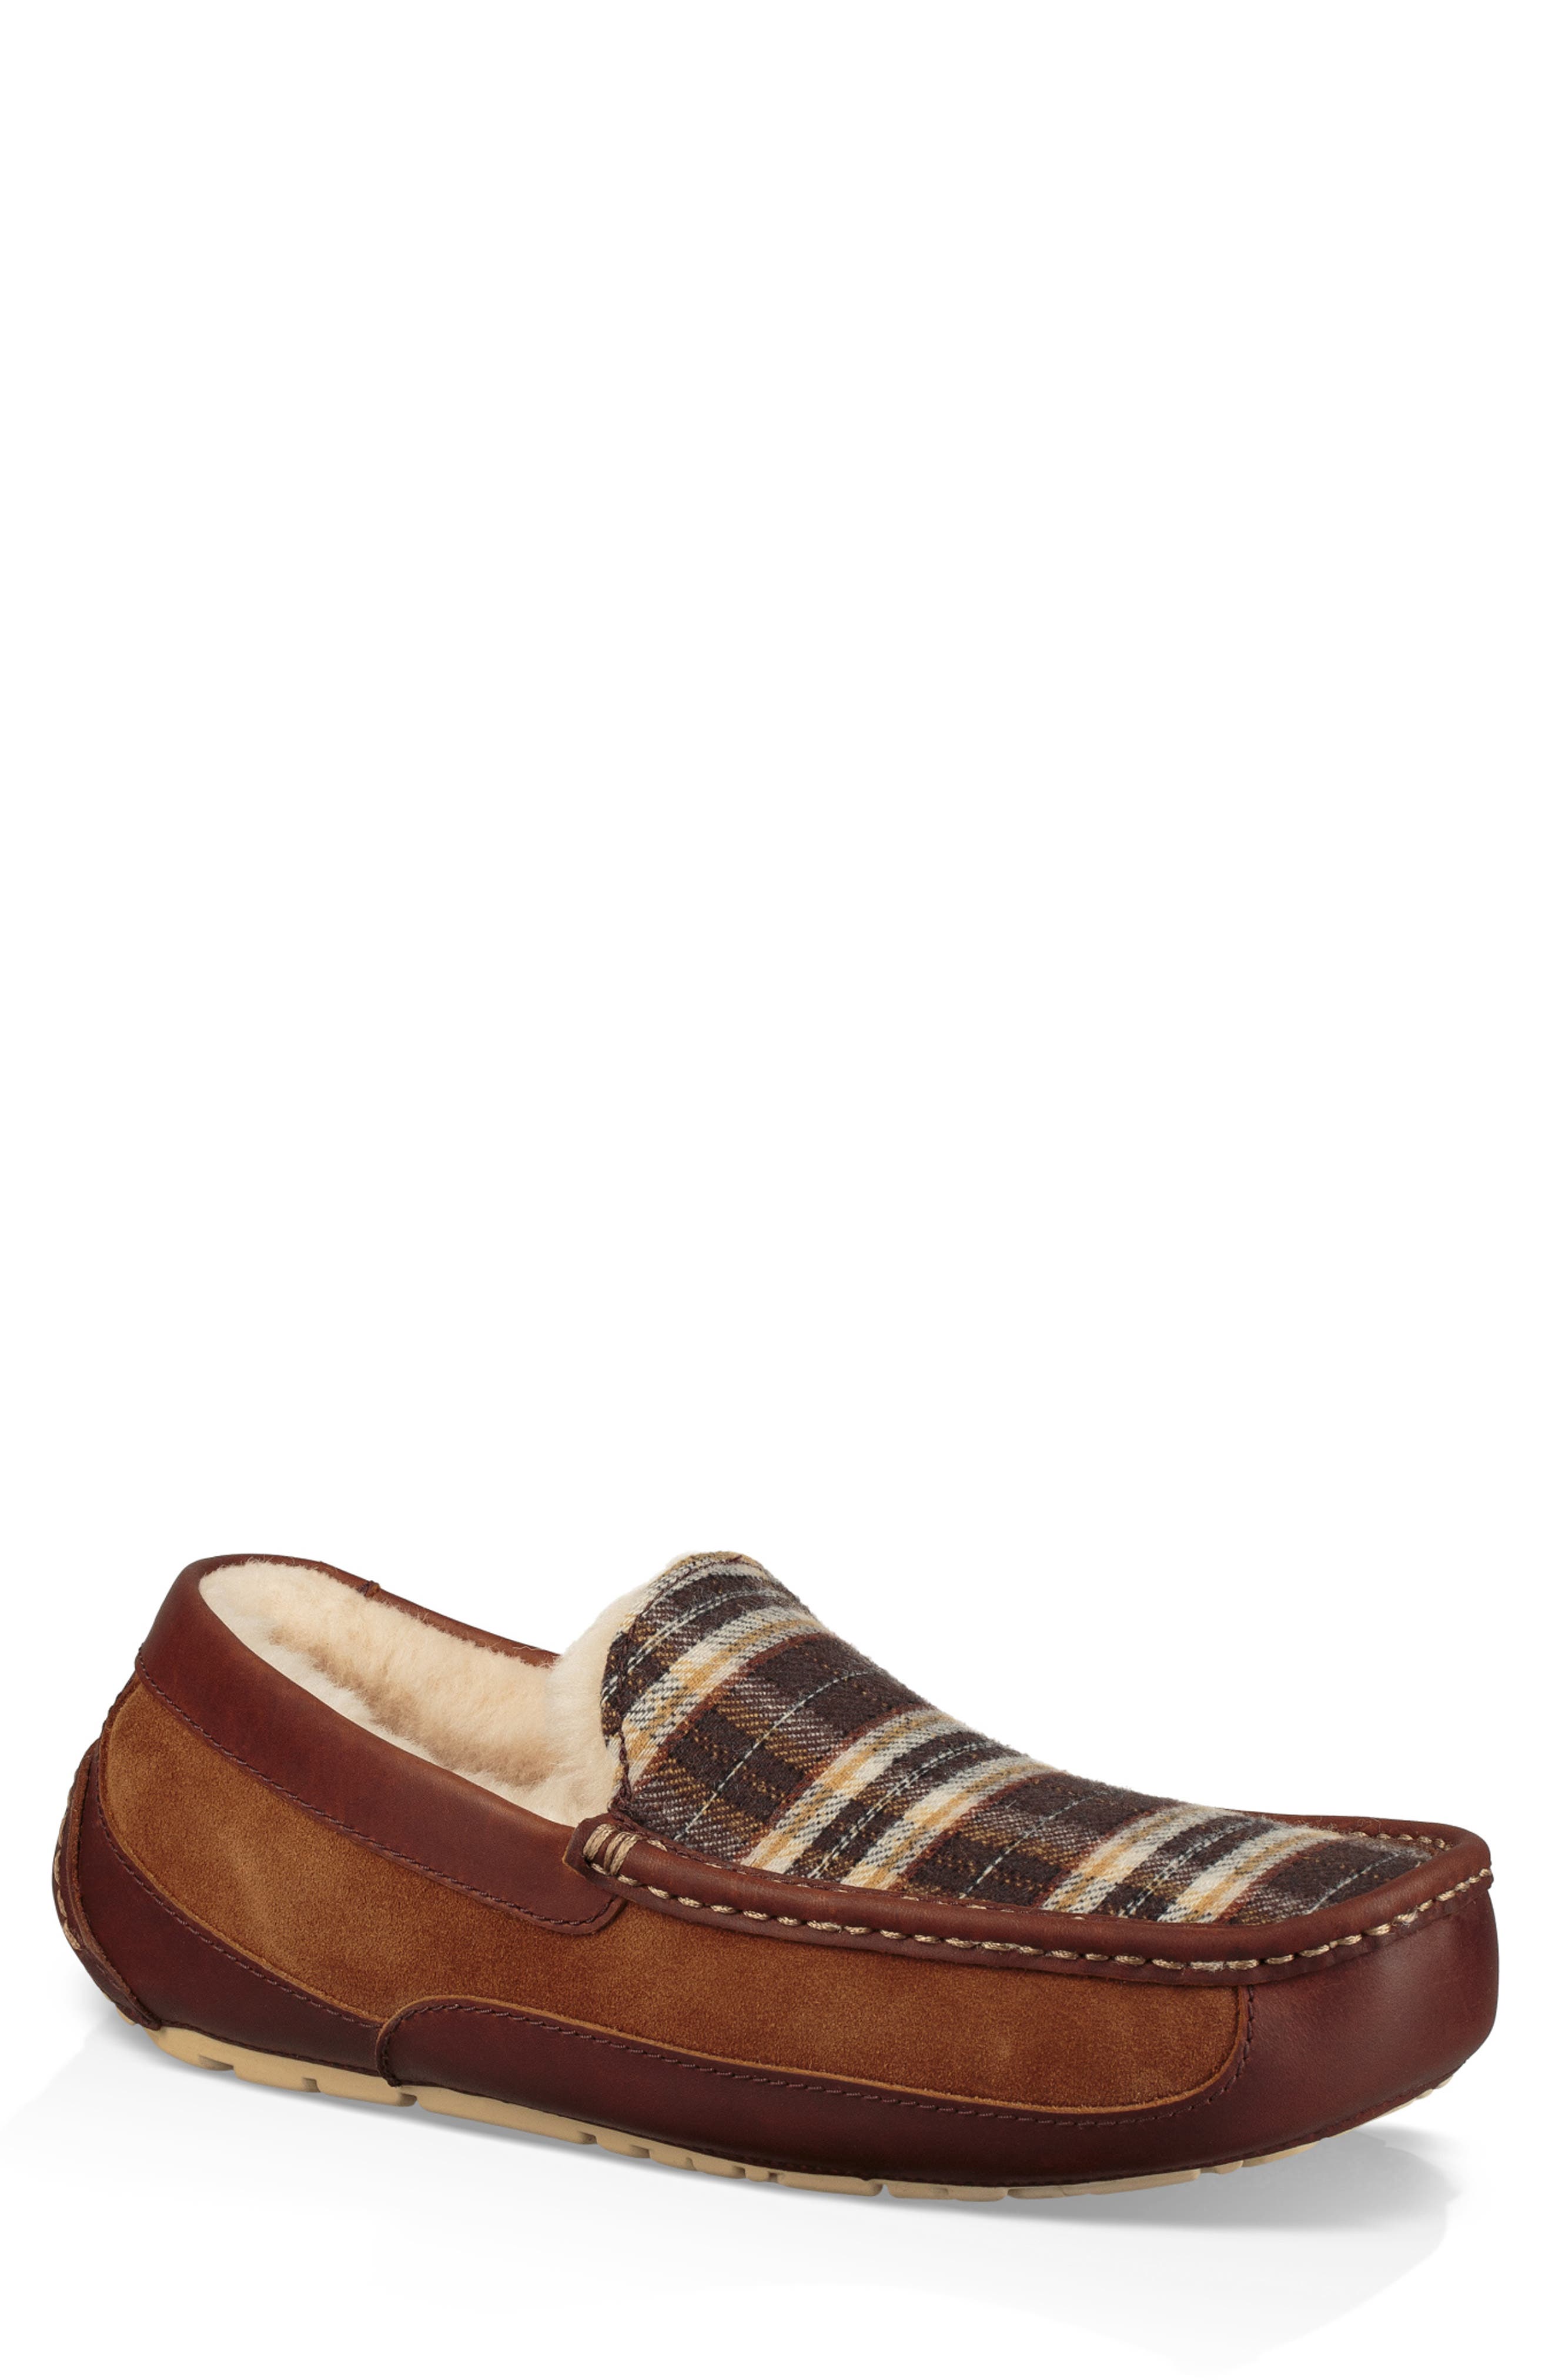 Ugg Men's Ascot Plaid Holiday Slippers 